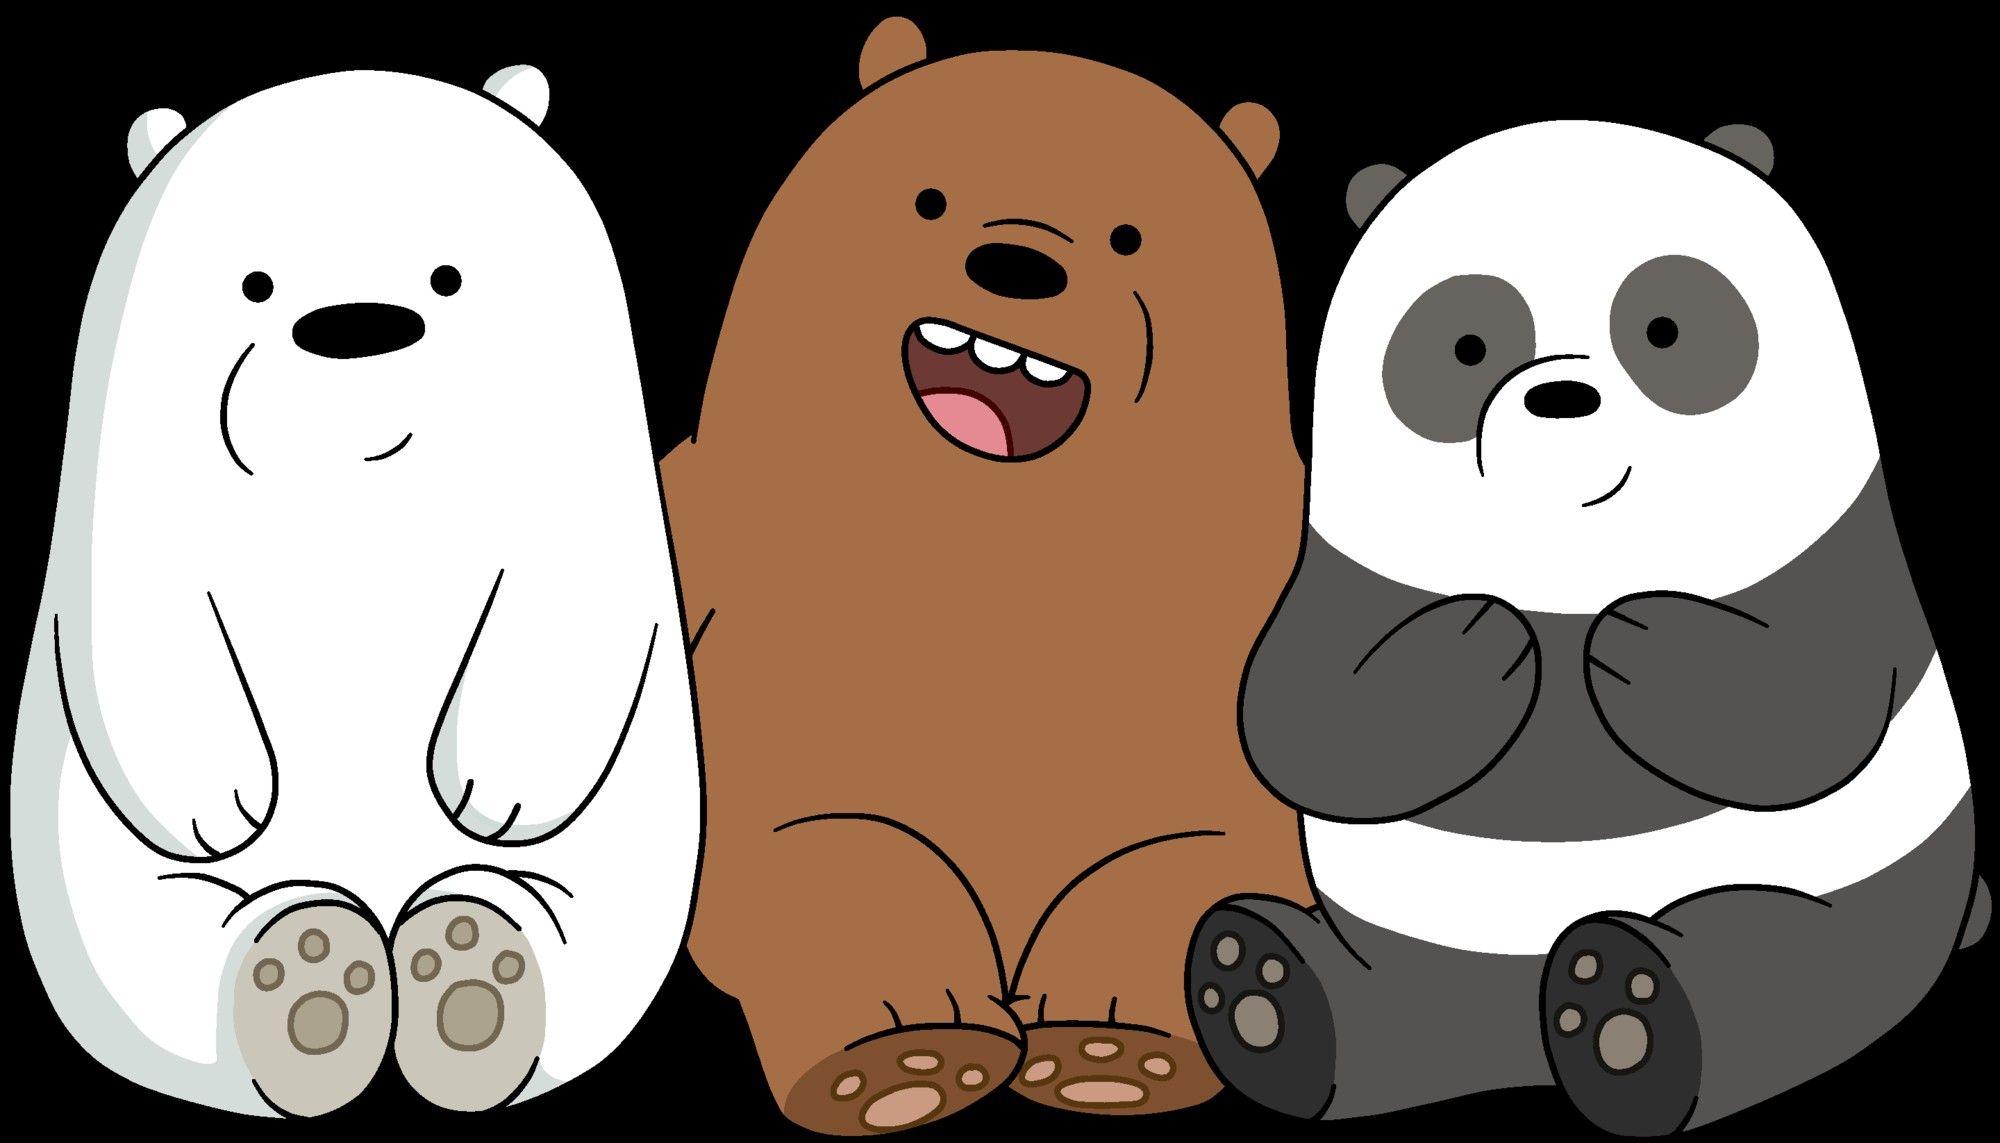 We Bare Bears Hd Iphone Wallpapers Wallpaper Cave